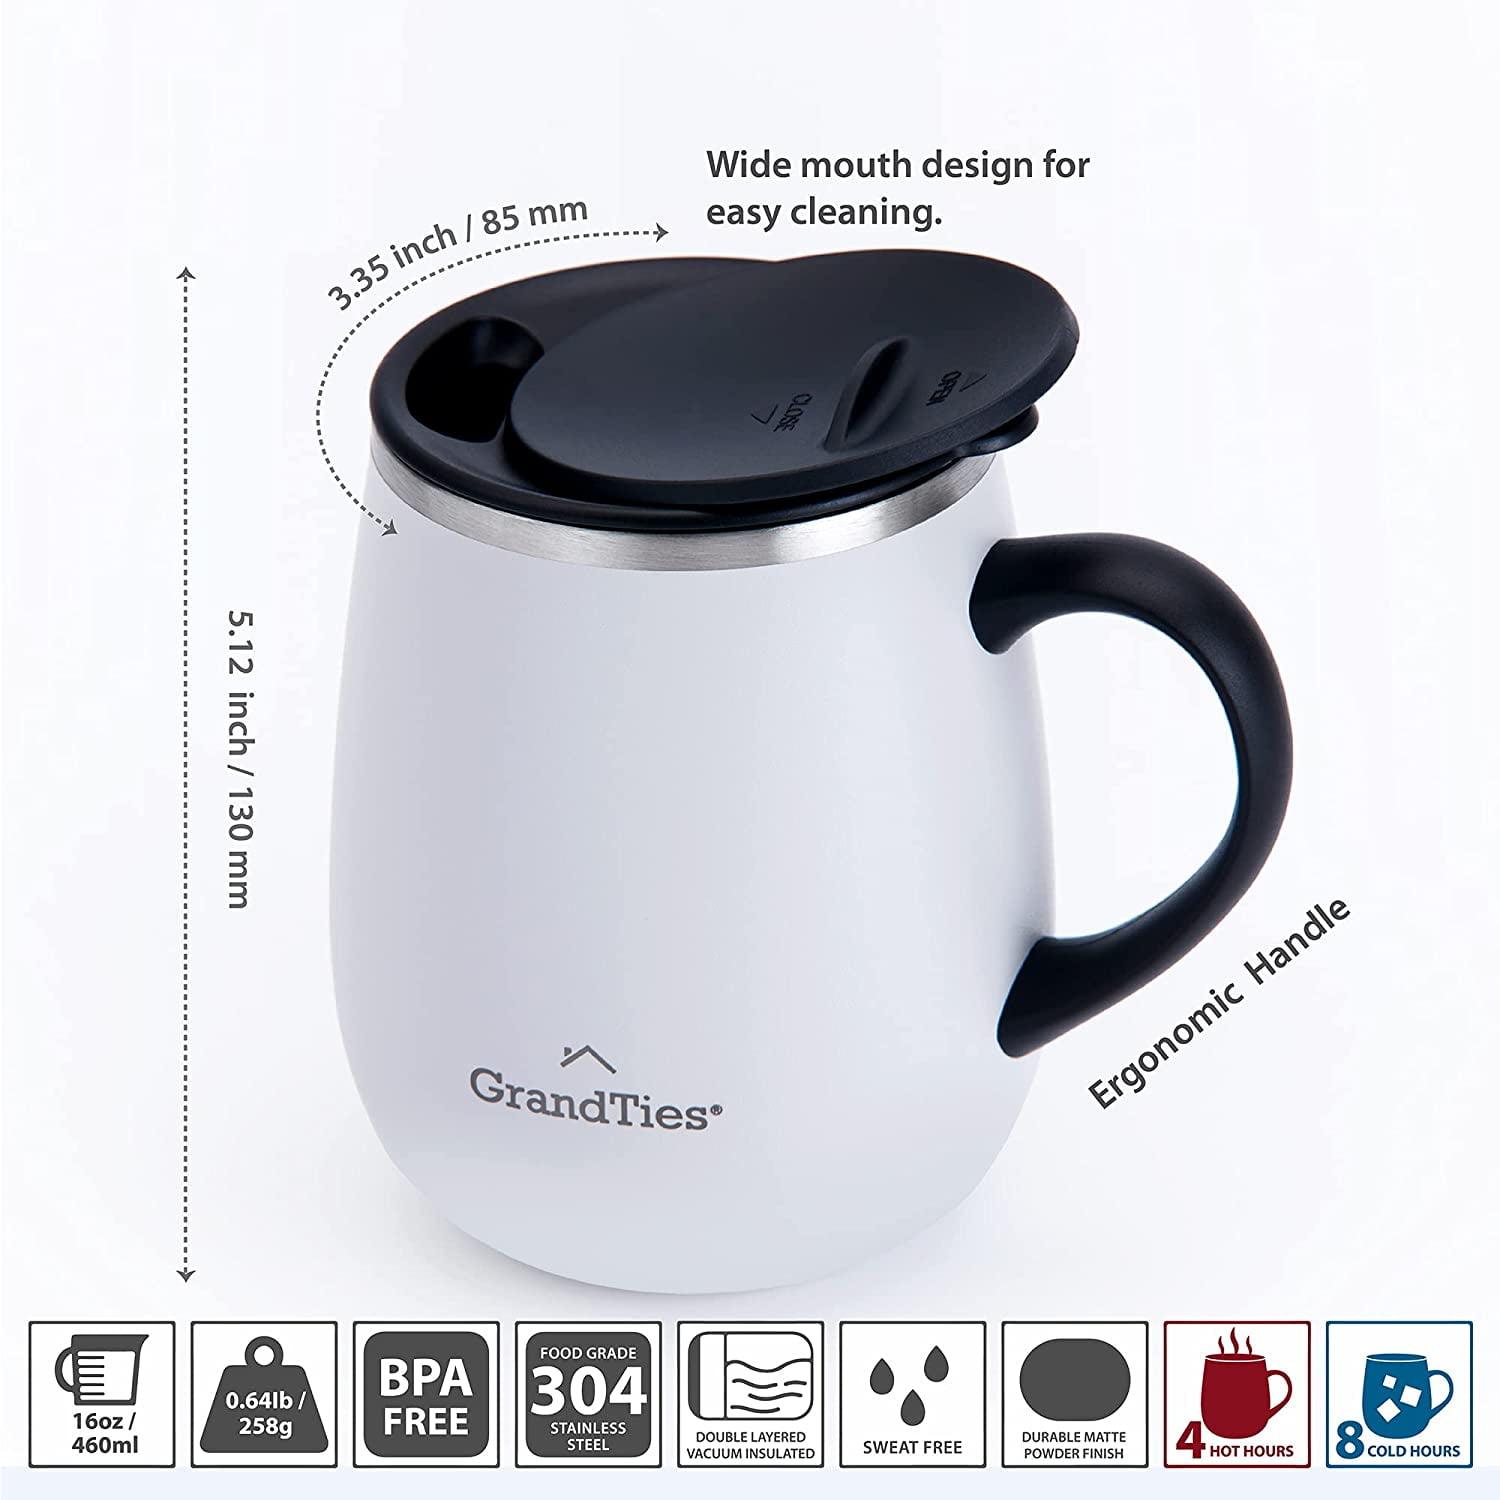 GrandTies Insulated Coffee Mug with Handle 16 oz. Wine-Glass Shape Thermal Tumbler with Sliding Lid for Splash-proof White